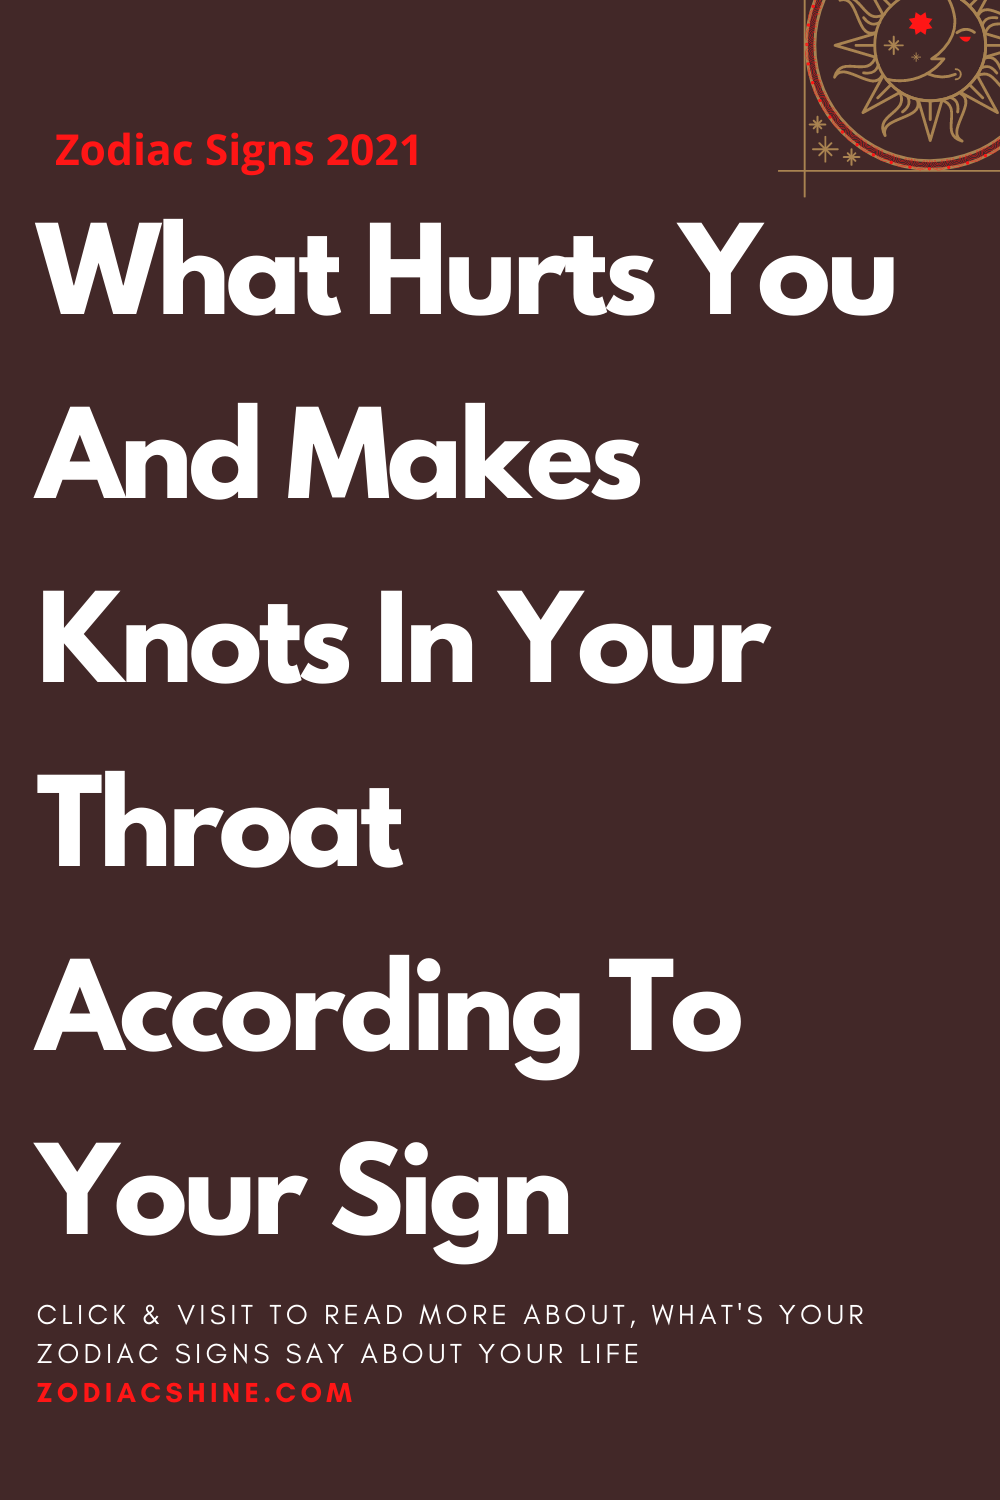 What Hurts You And Makes Knots In Your Throat According To Your Sign